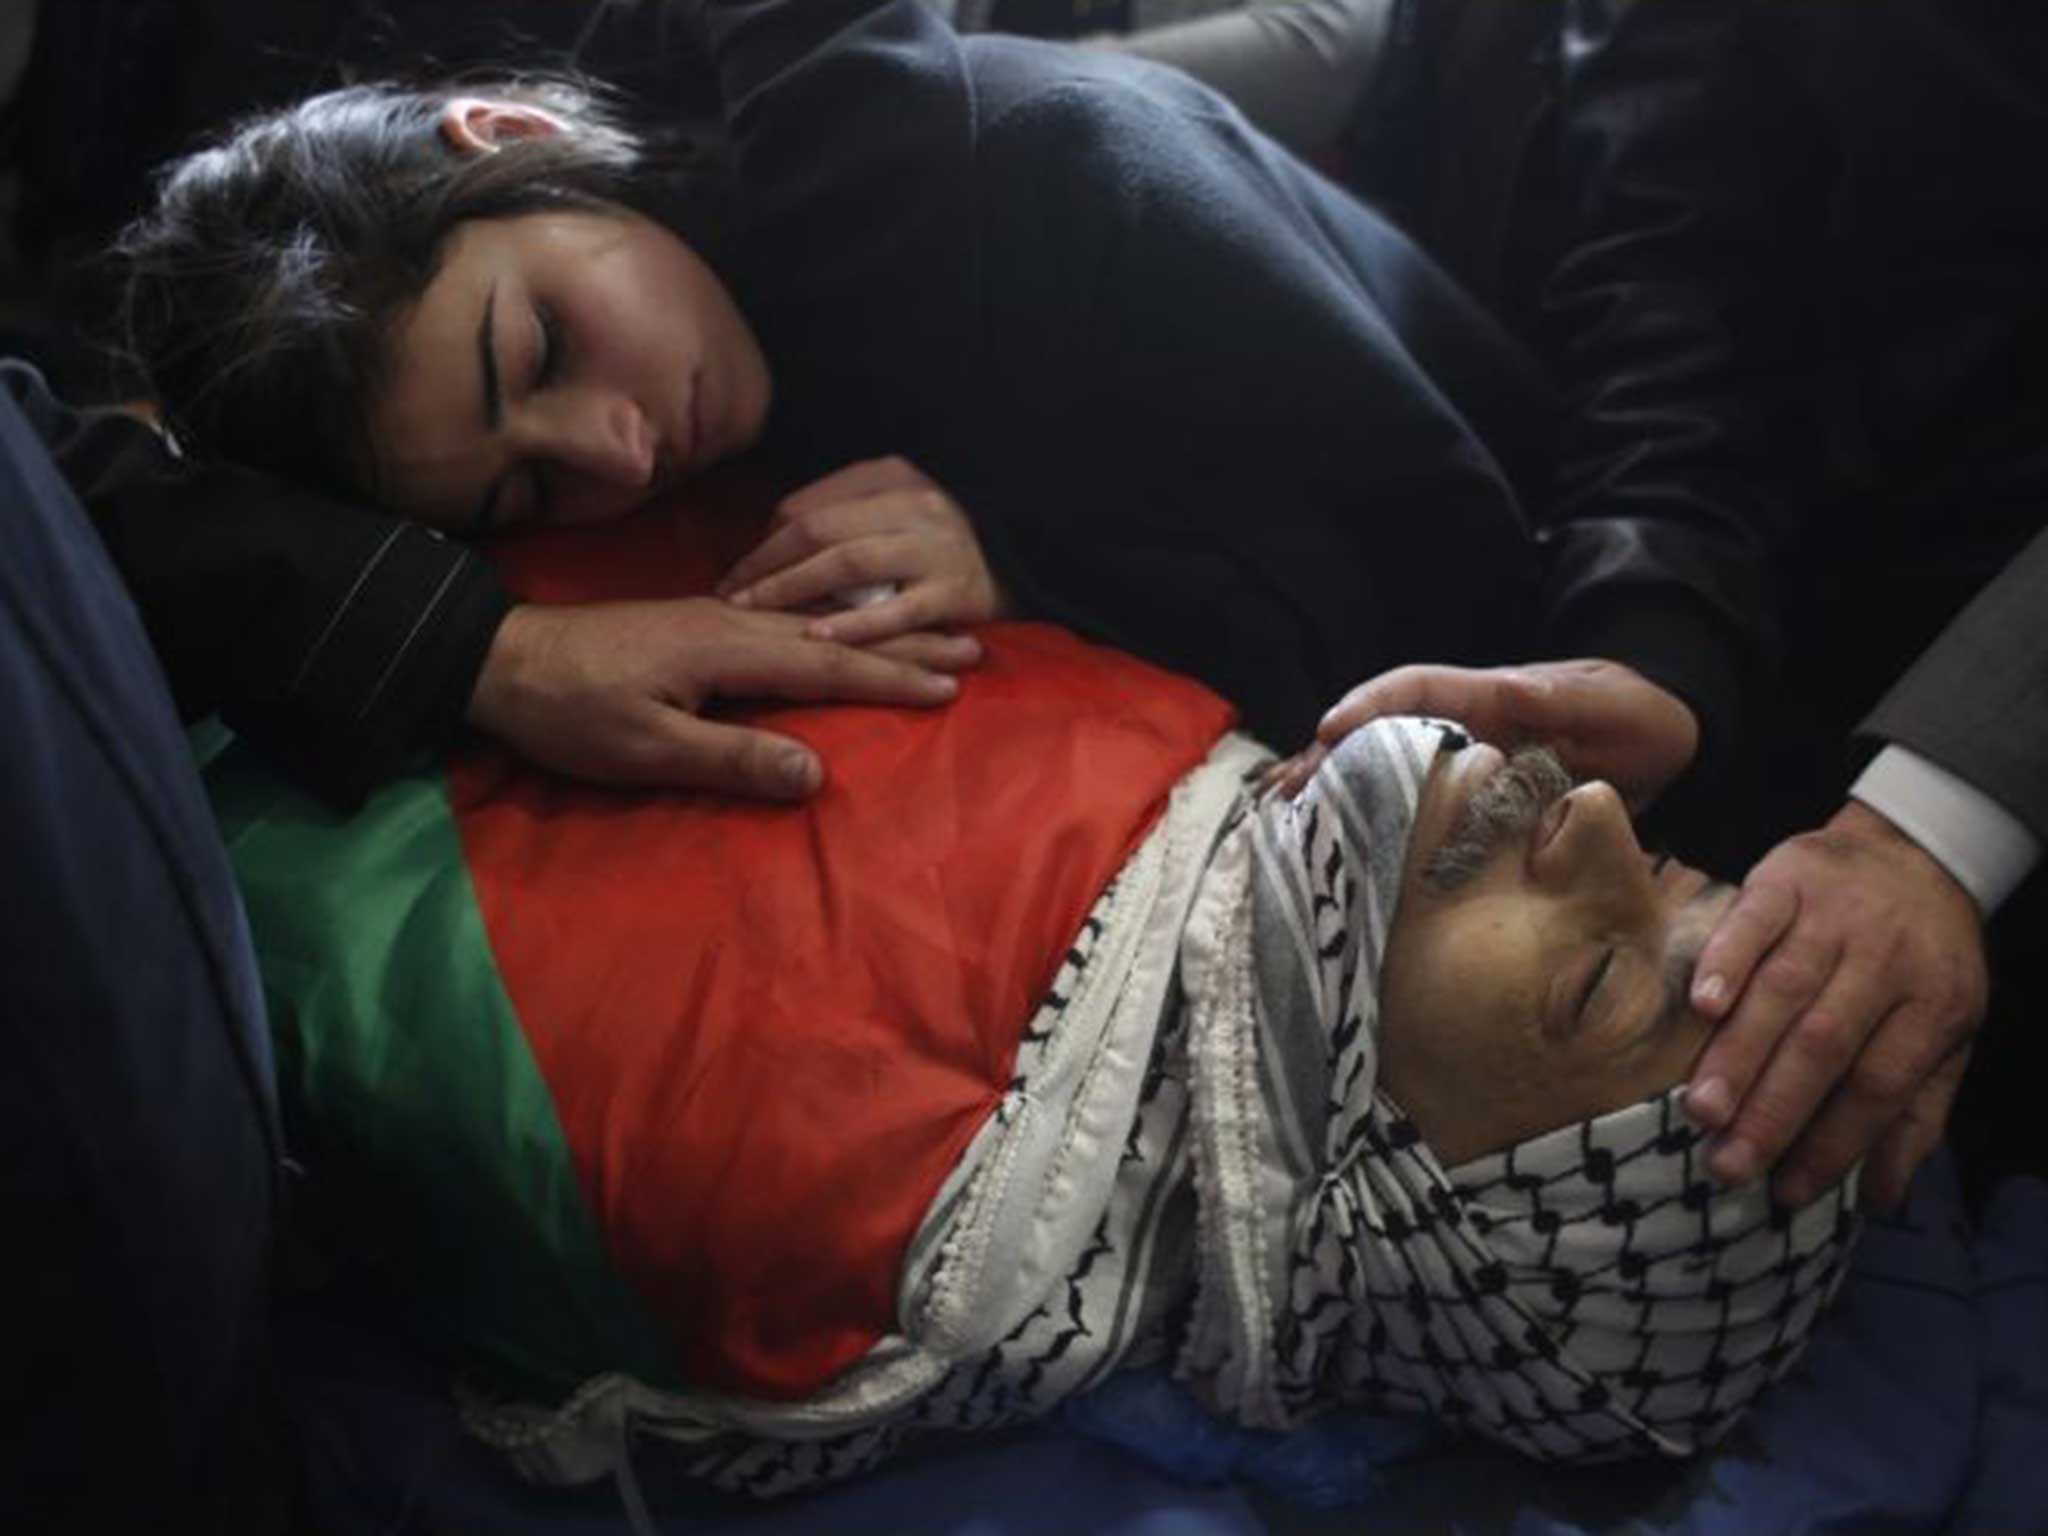 The daughter of killed Palestinian official Ziad Abu Ein bids her father goodbye